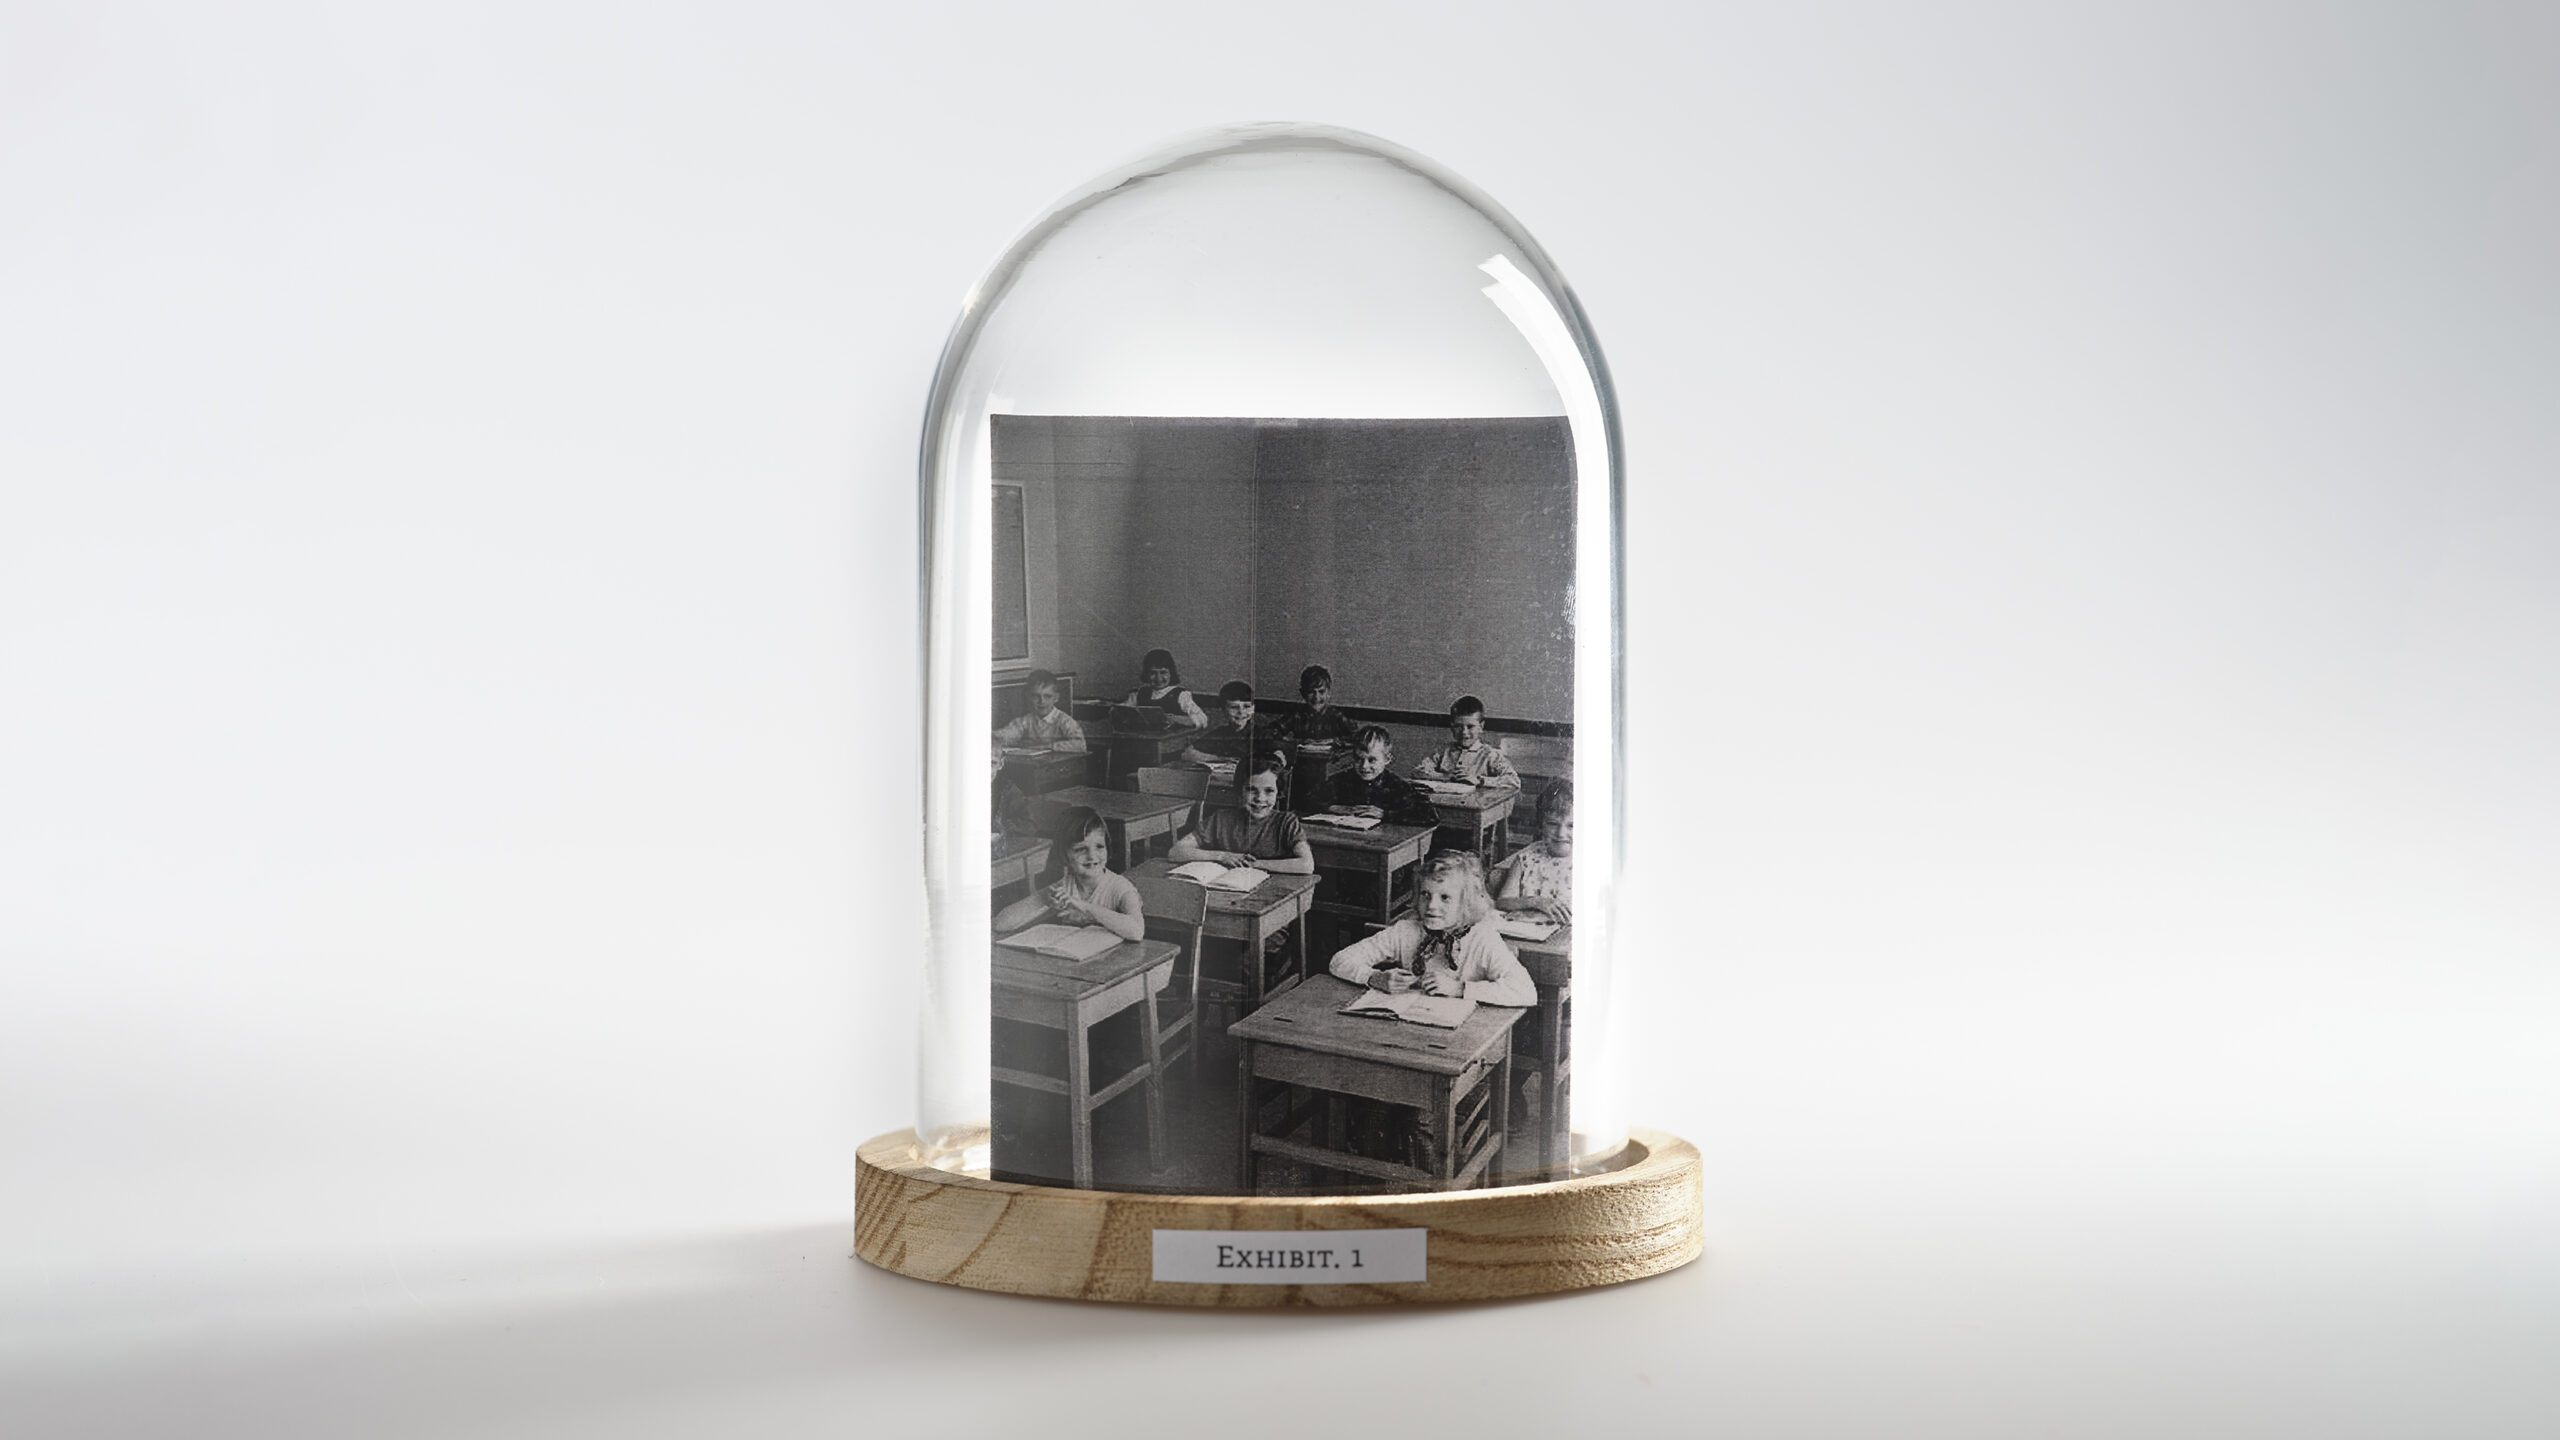 A bell jar with an image of a classroom full of children inside.